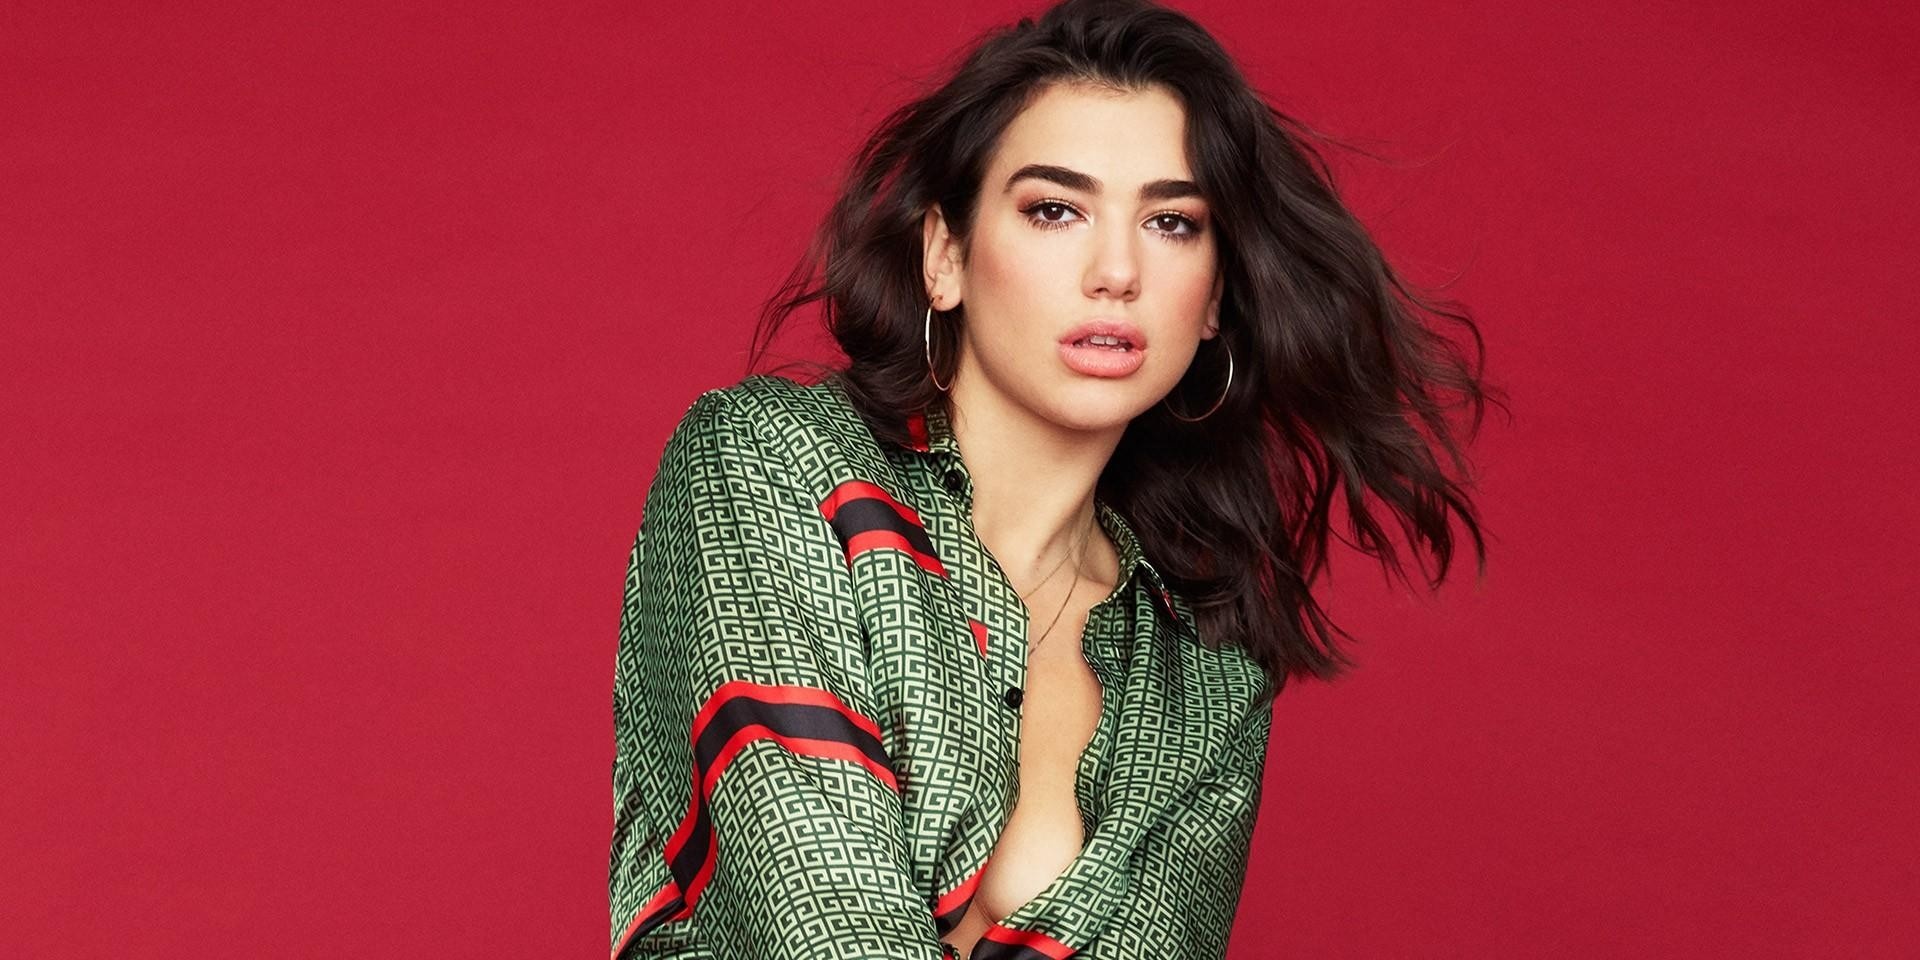 Dua Lipa Wallpaper Rules Queen in Your Chrome Browser!